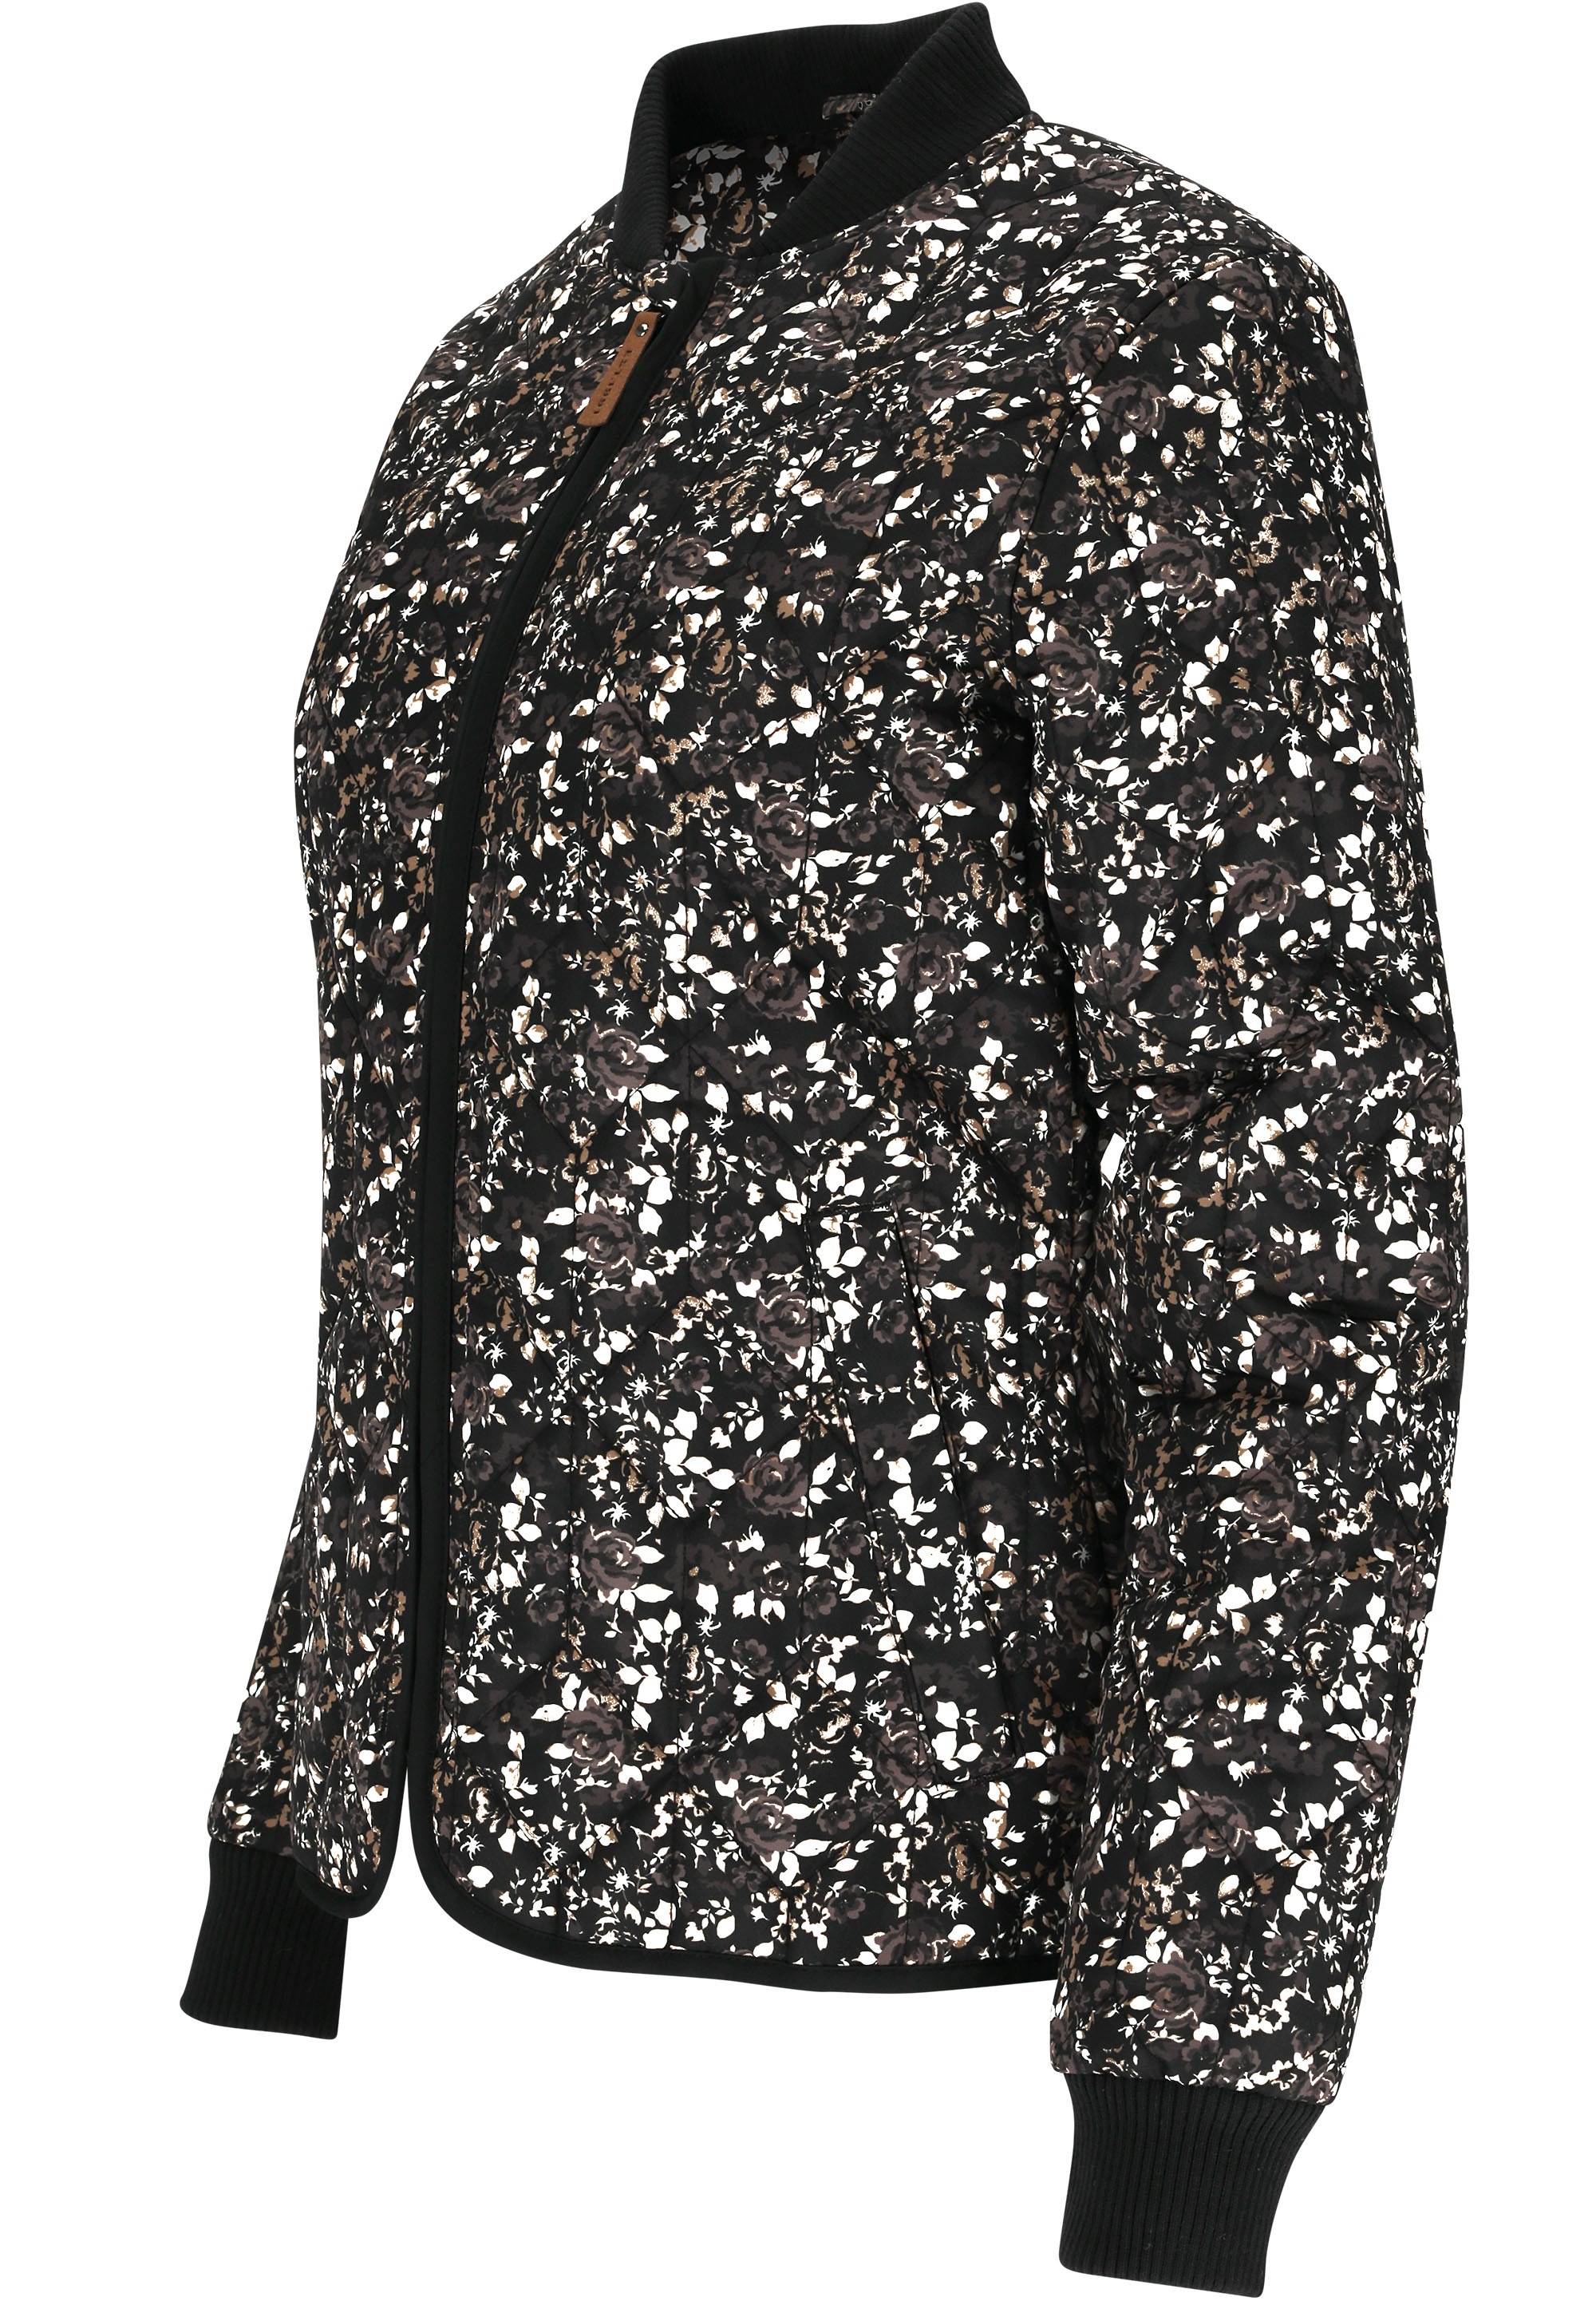 Allover-Muster WEATHER Outdoorjacke mit REPORT floralem »Floral«, online